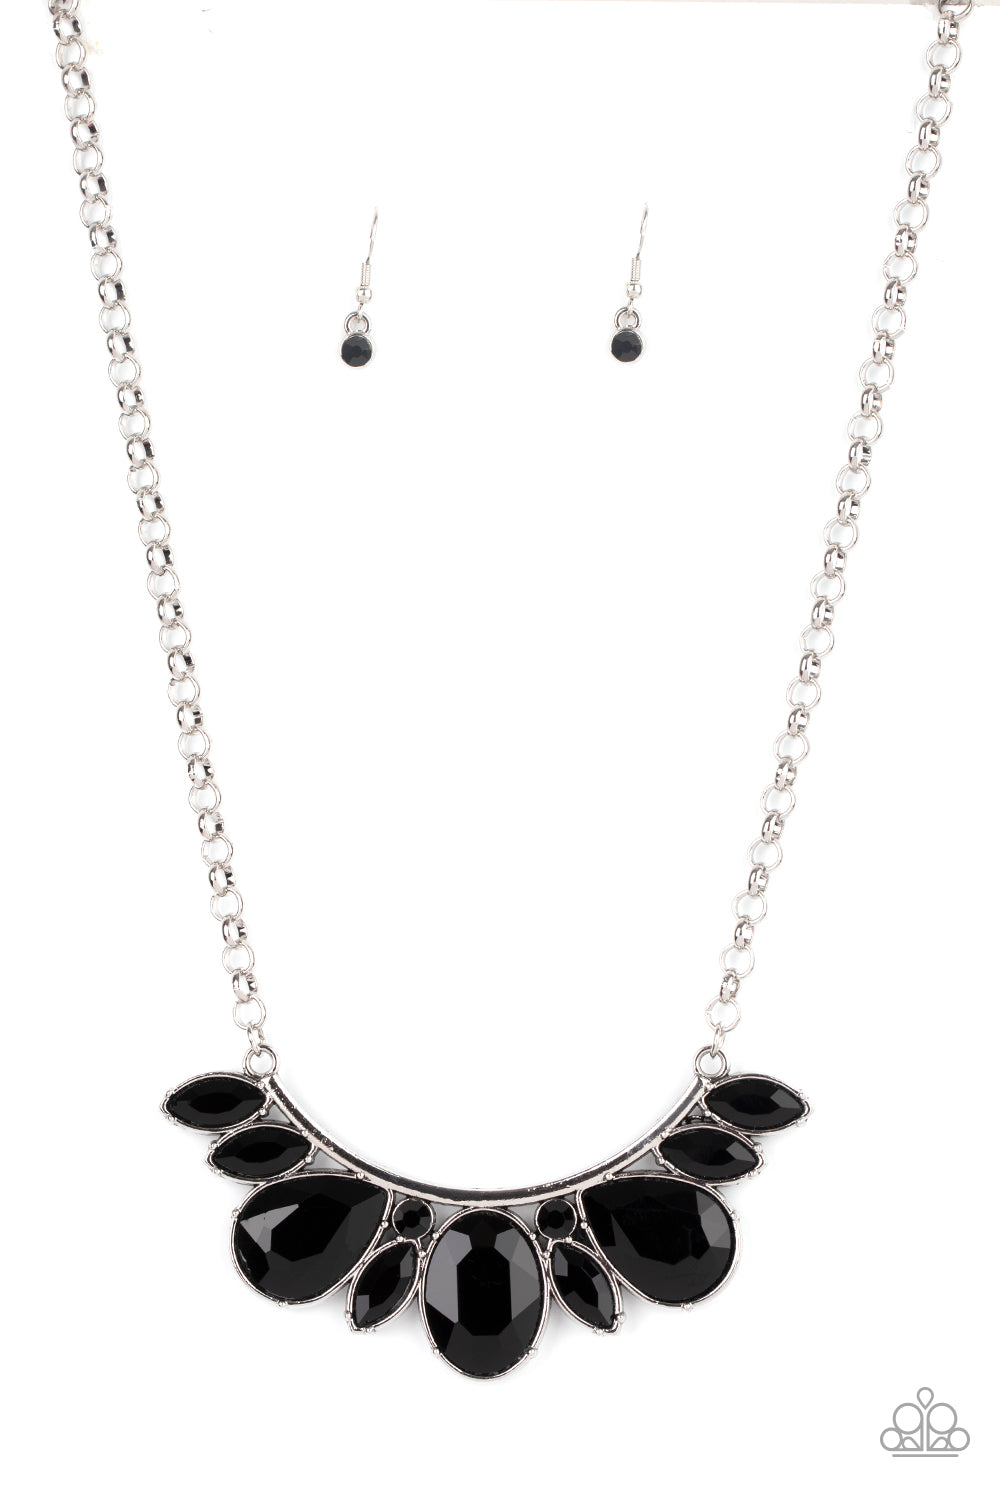 Never SLAY Never Black Necklace - Paparazzi Accessories  An oversized collection of round, marquise, and teardrop black rhinestones drip from the bottom of a bowing silver bar, coalescing into a sassy statement piece below the collar. Features an adjustable clasp closure.  All Paparazzi Accessories are lead free and nickel free!  Sold as one individual necklace. Includes one pair of matching earrings.